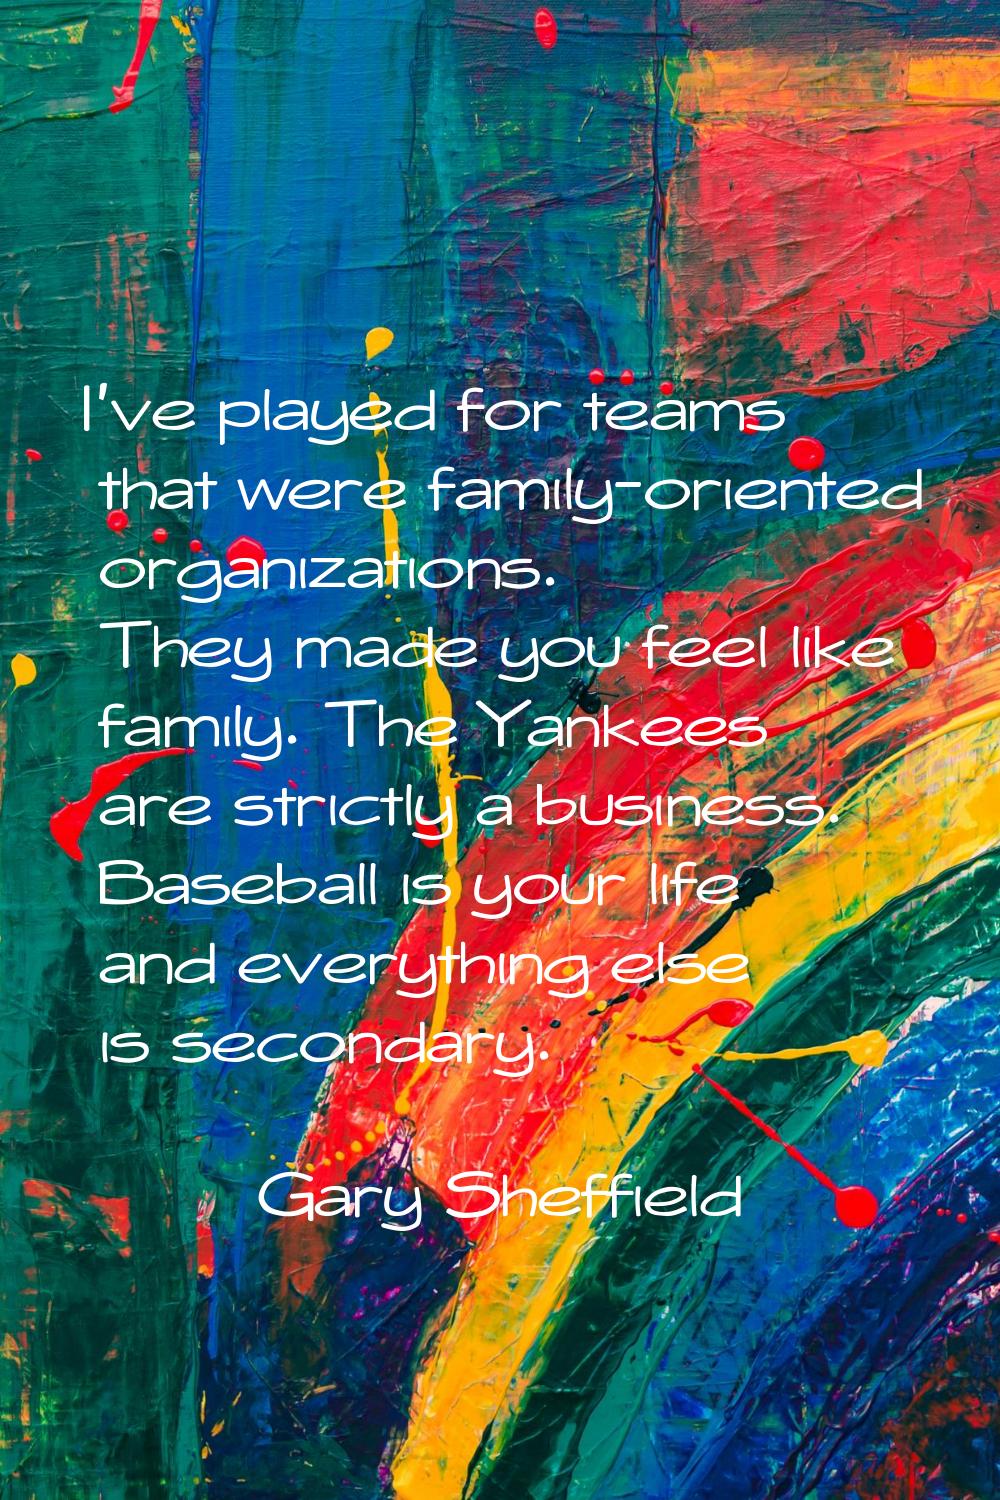 I've played for teams that were family-oriented organizations. They made you feel like family. The 